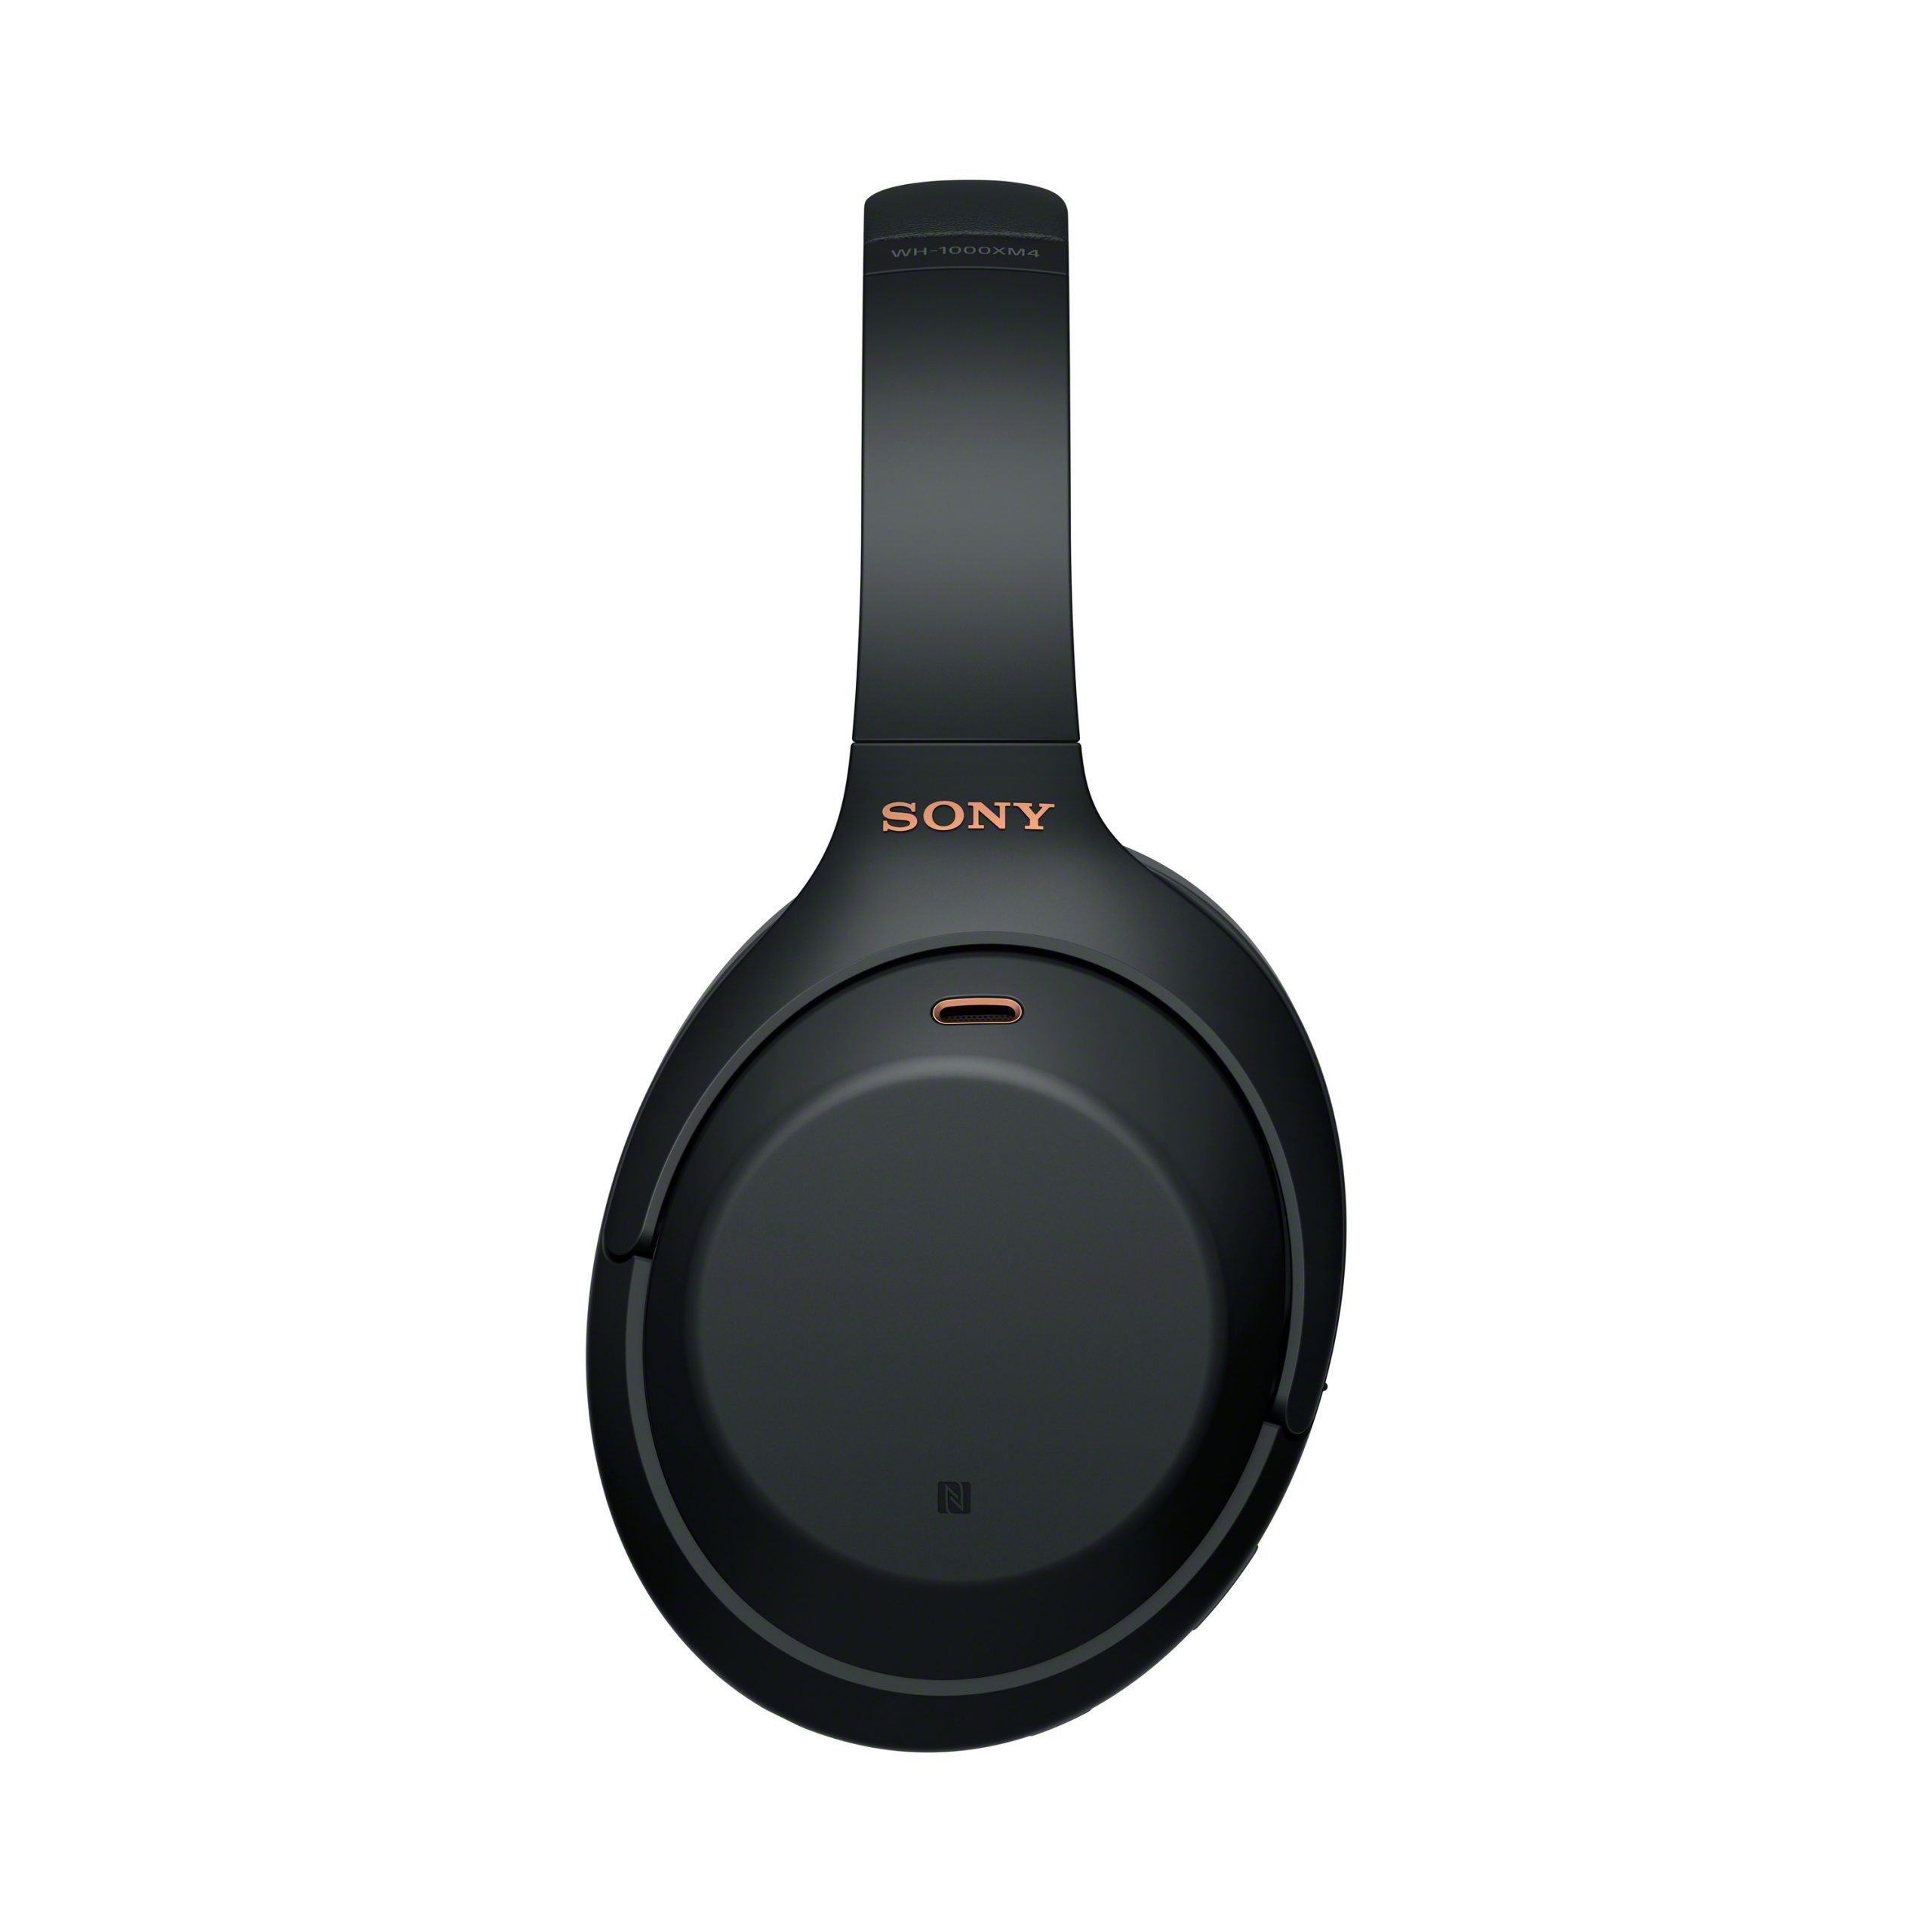 Review: Sony WH-1000XM4 - The New King Of Noise Cancelling